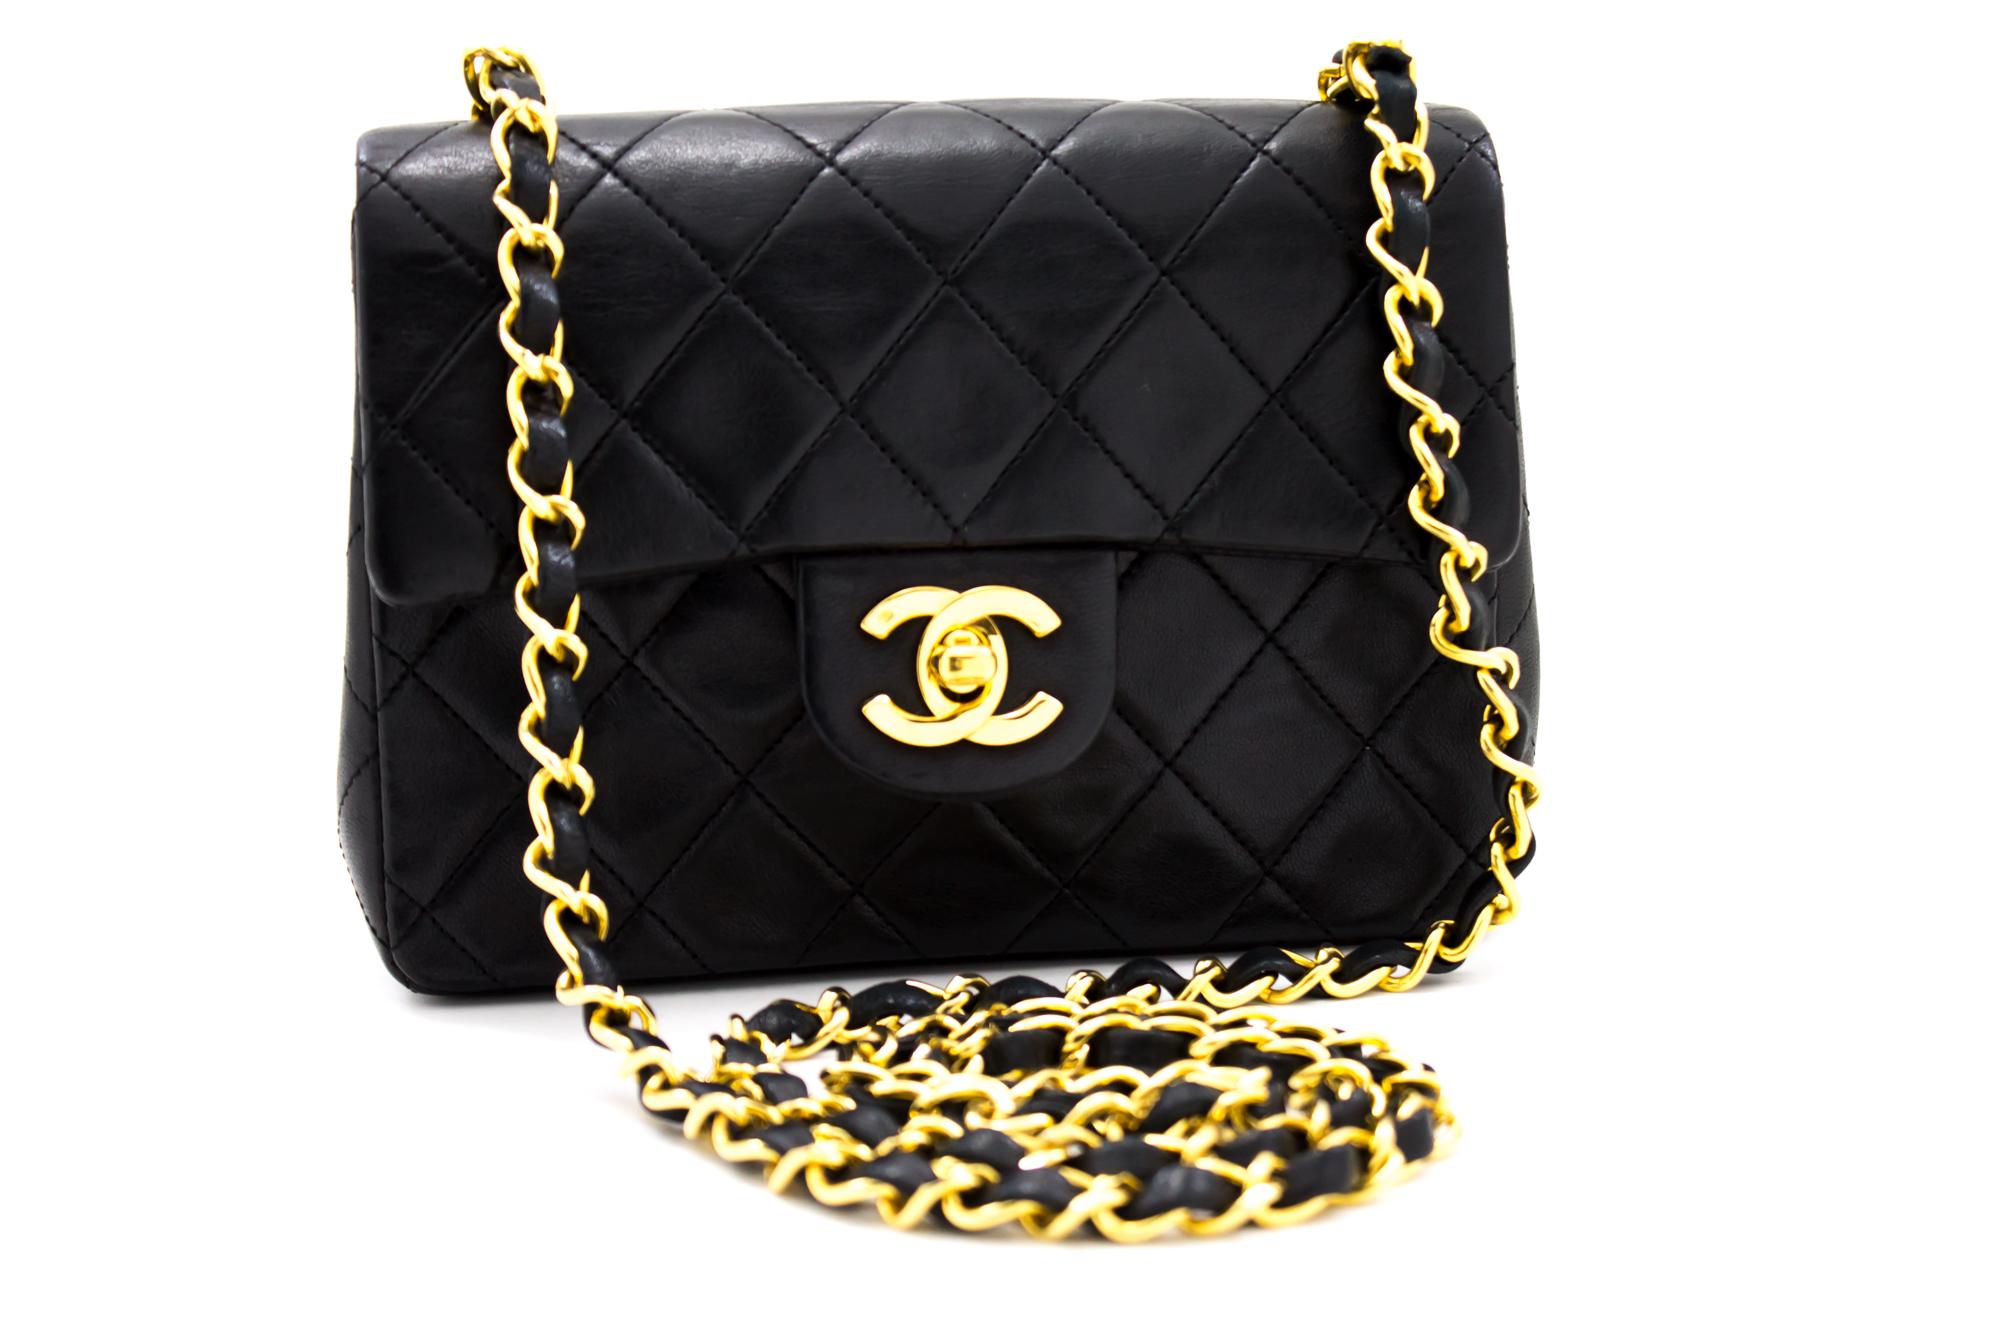 An authentic CHANEL Mini Square Small Chain Shoulder Bag Crossbody Black. The color is Black. The outside material is Leather. The pattern is Solid. This item is Vintage / Classic. The year of manufacture would be 1989-1991.
Conditions &